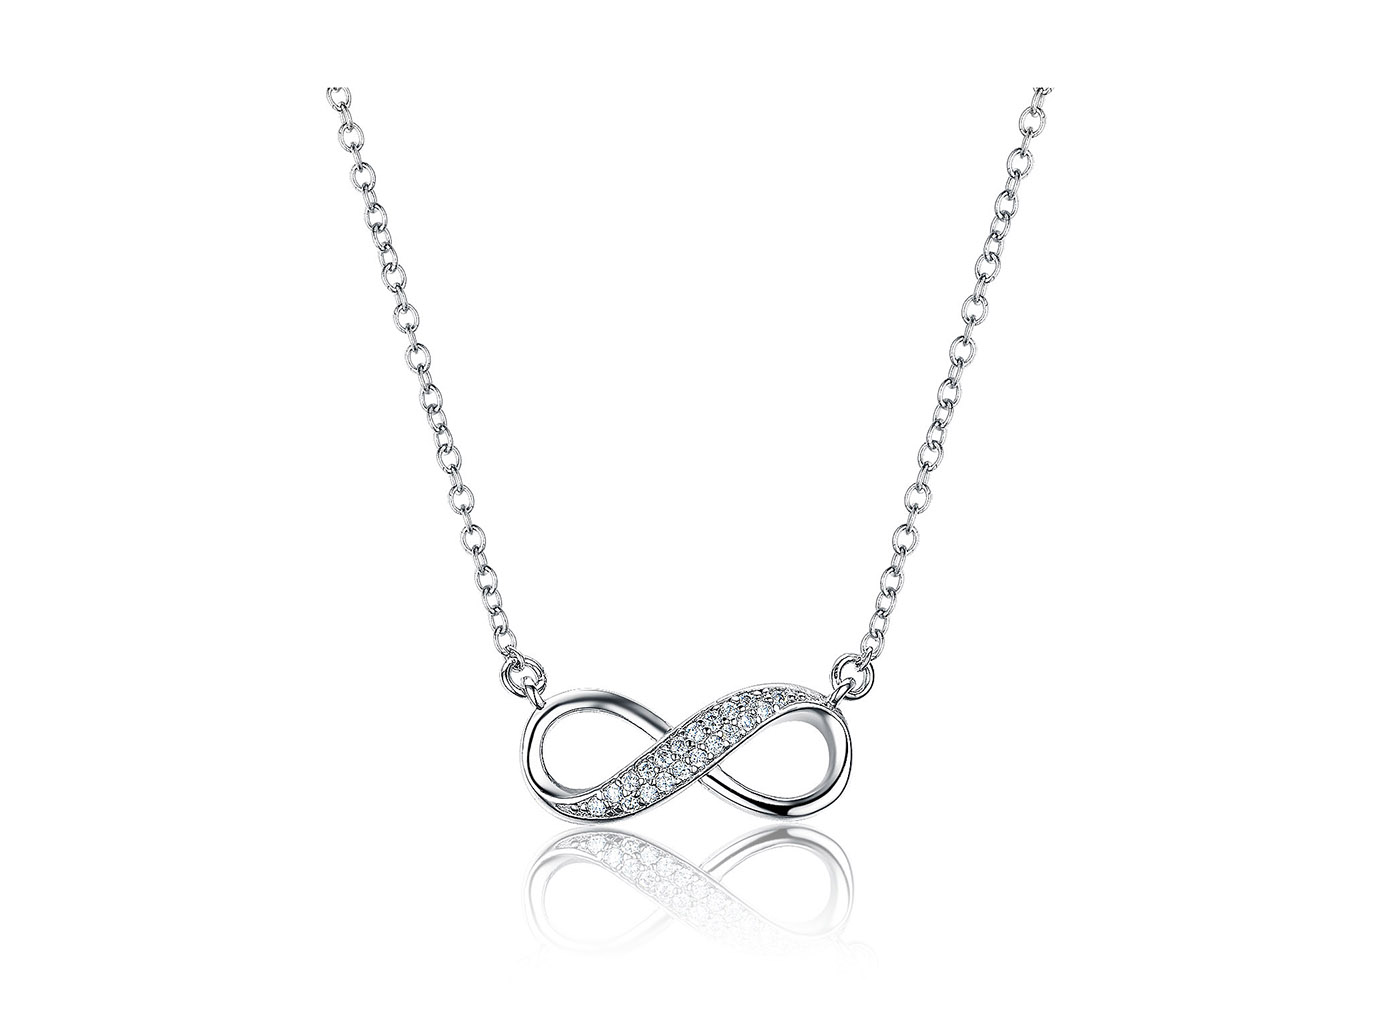 Infinity Pendant Necklace in Sterling Silver, 16″ + 2″ ຂະຫຍາຍ